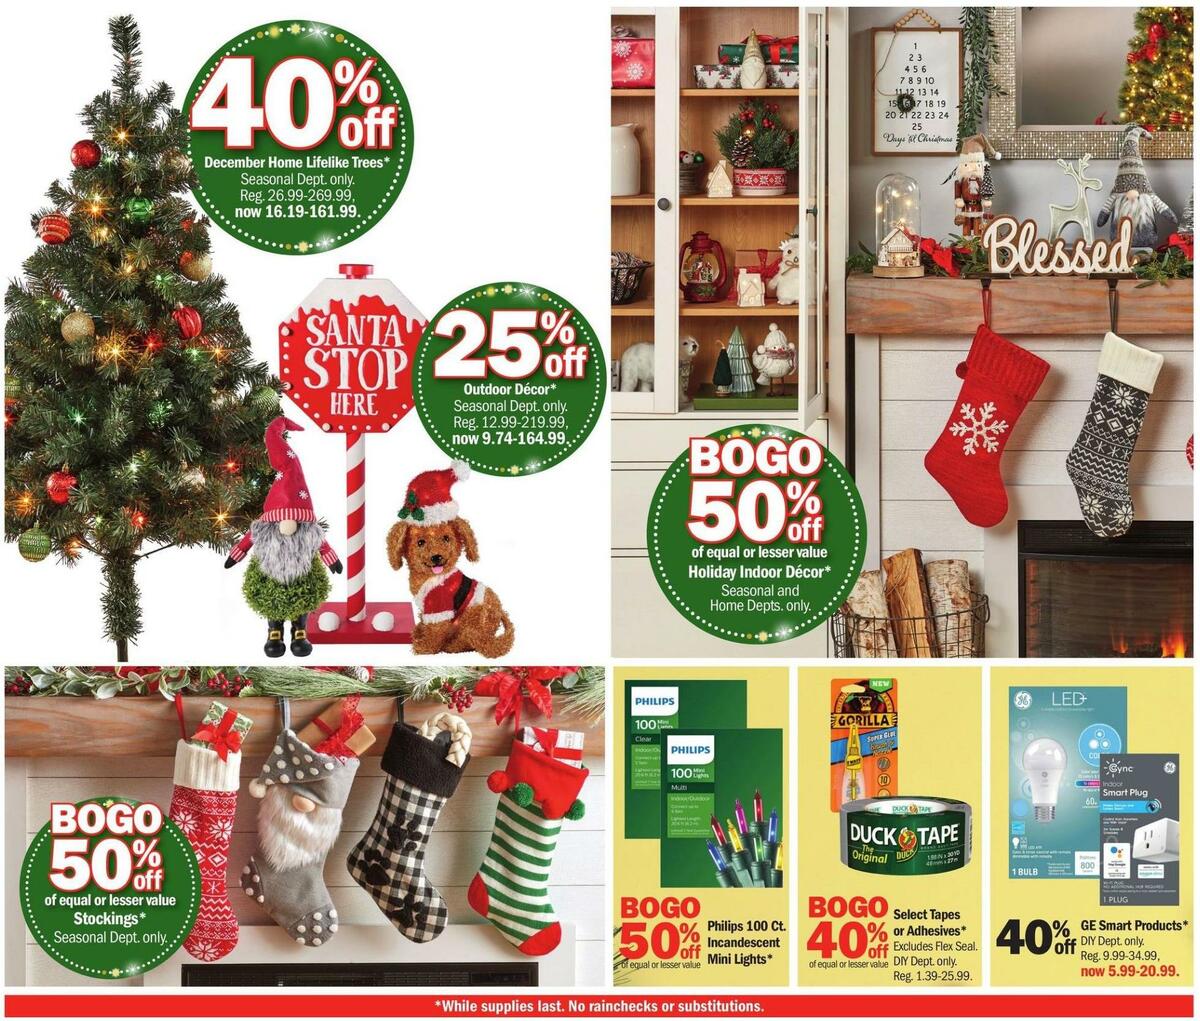 Meijer Holiday Weekly Ad from December 3